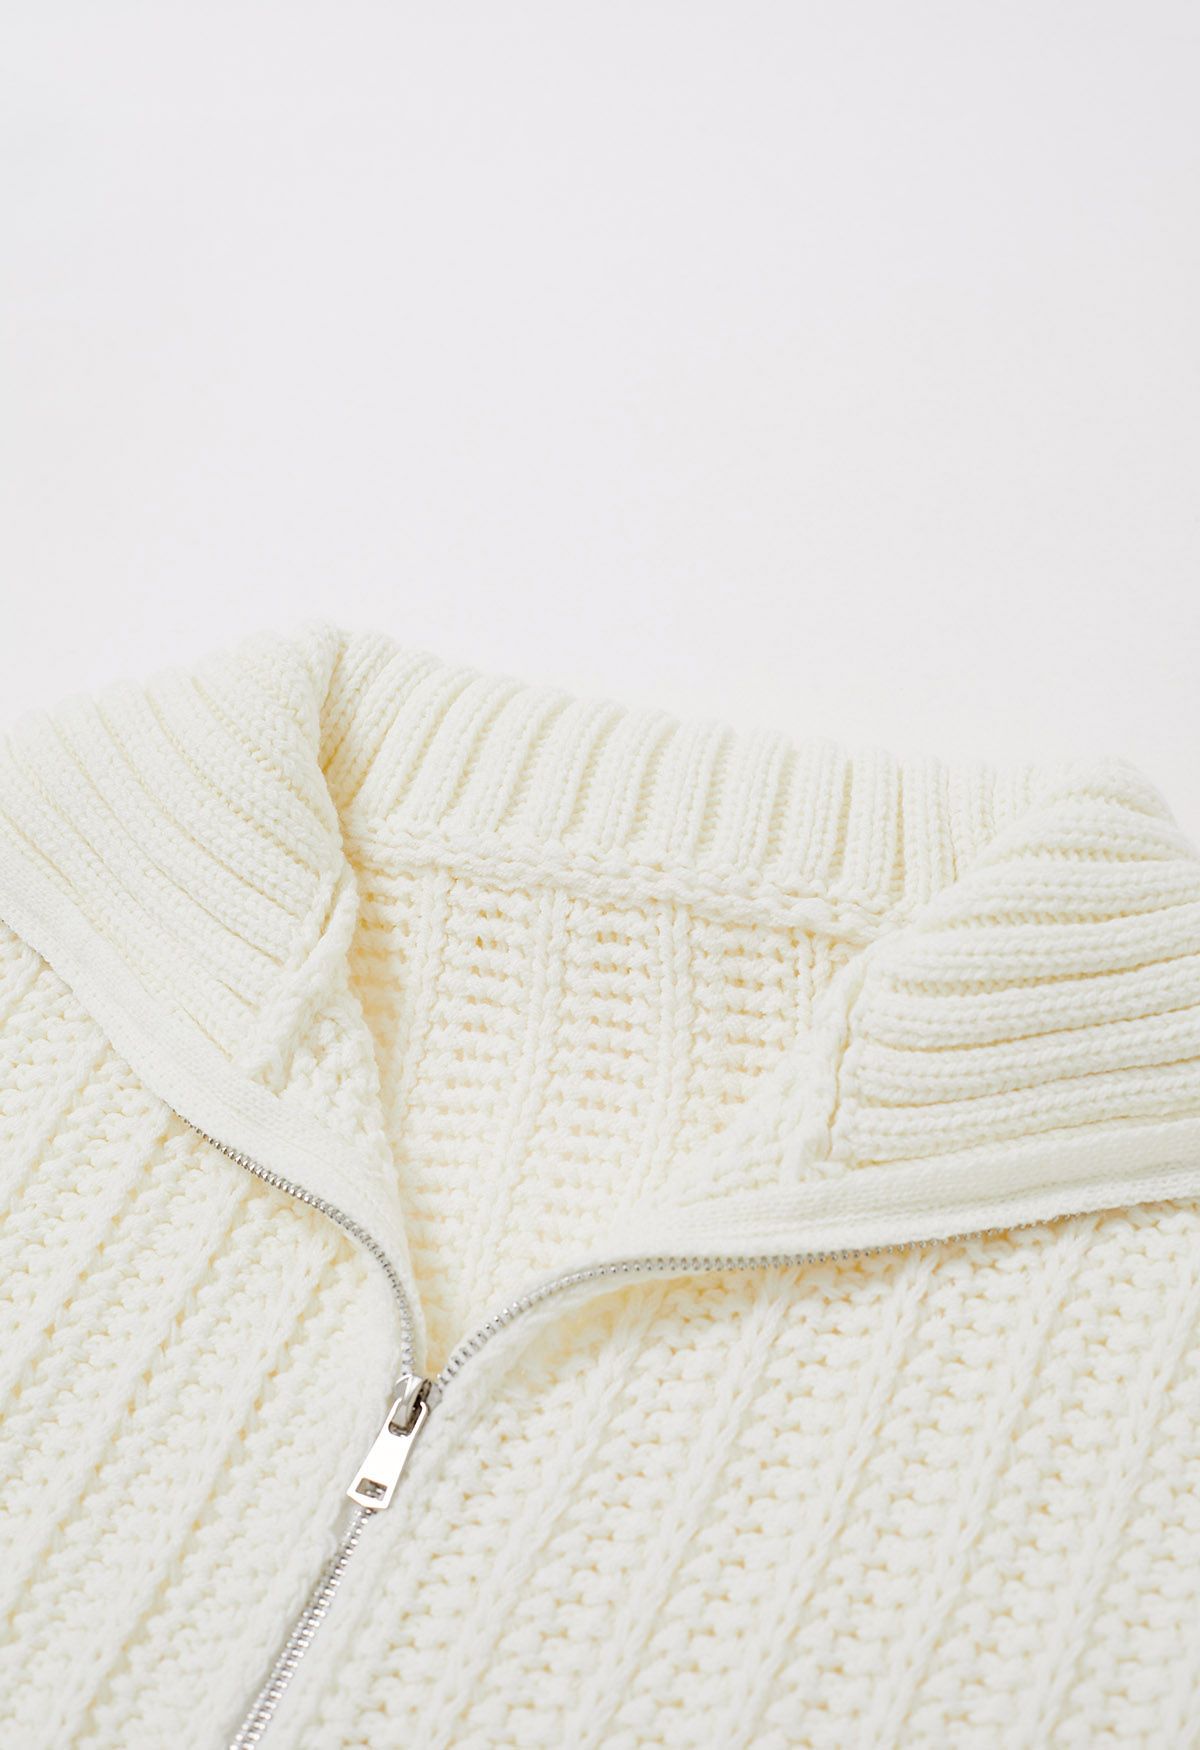 High Neck Chunky Knit Zip Up Cardigan in White